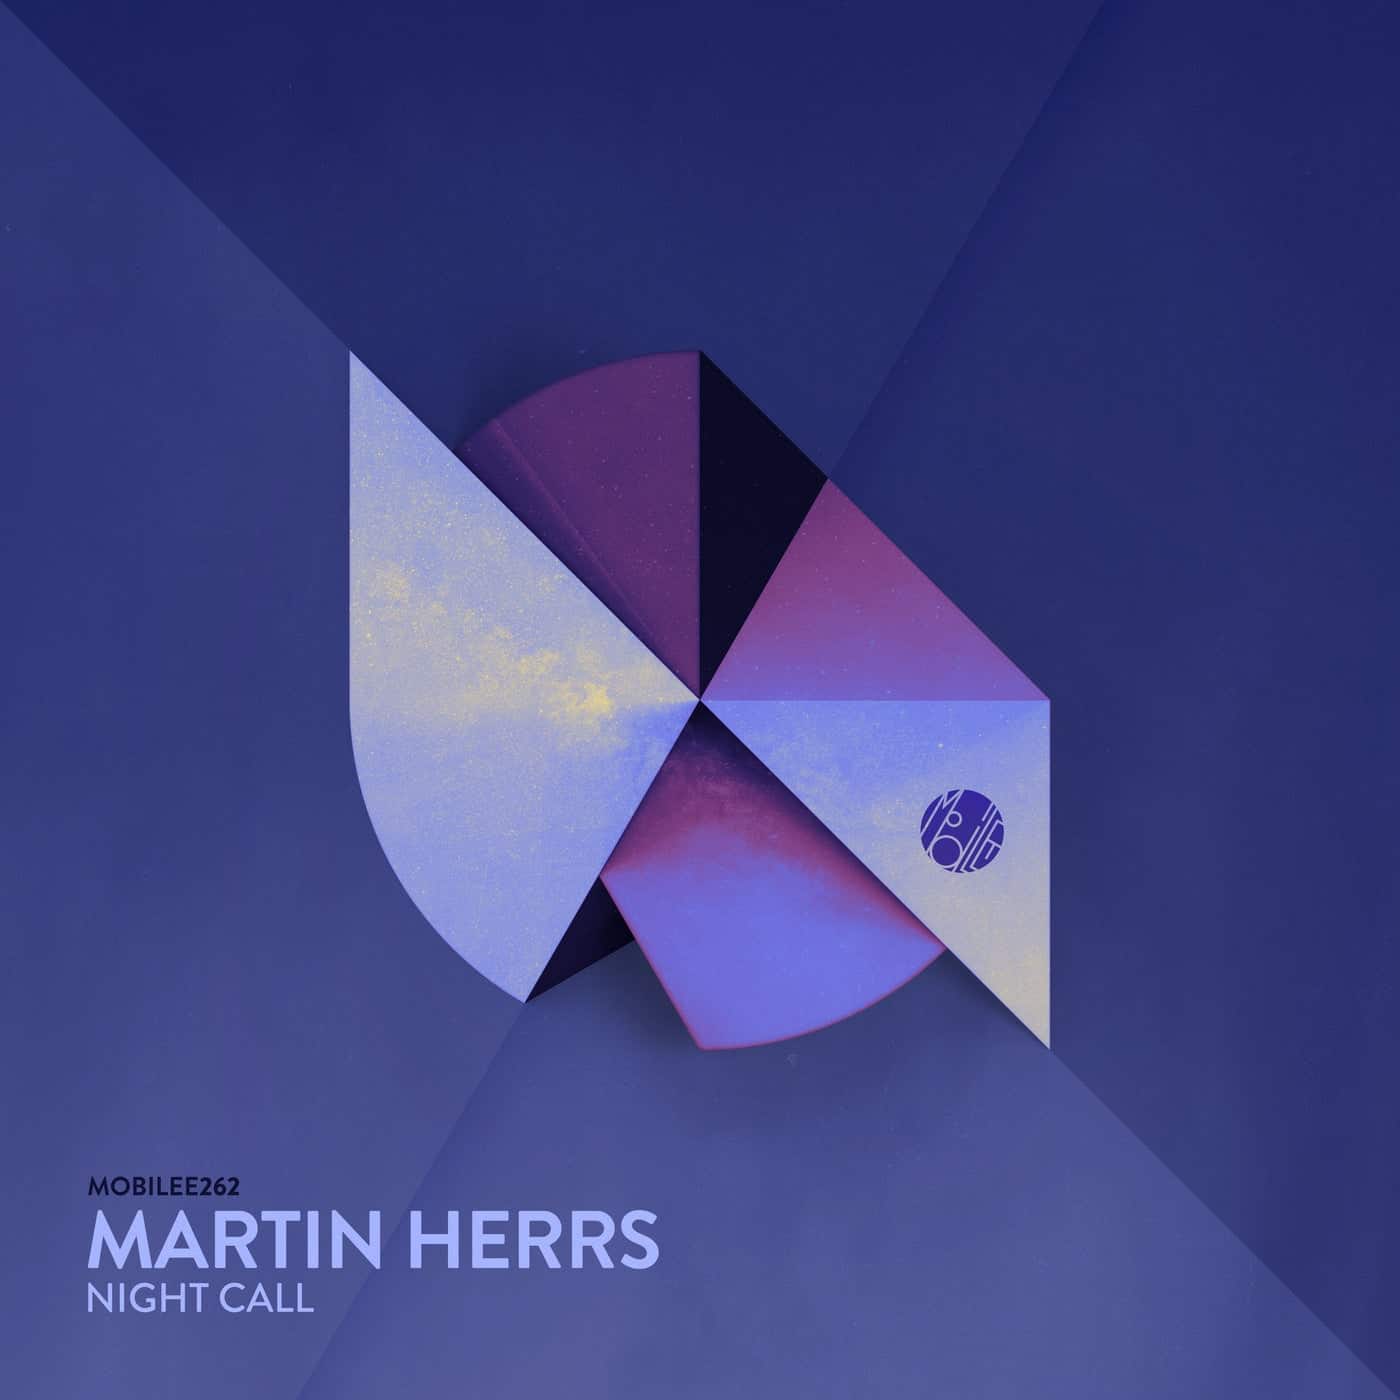 image cover: Martin HERRS - Night Call / MOBILEE262BP